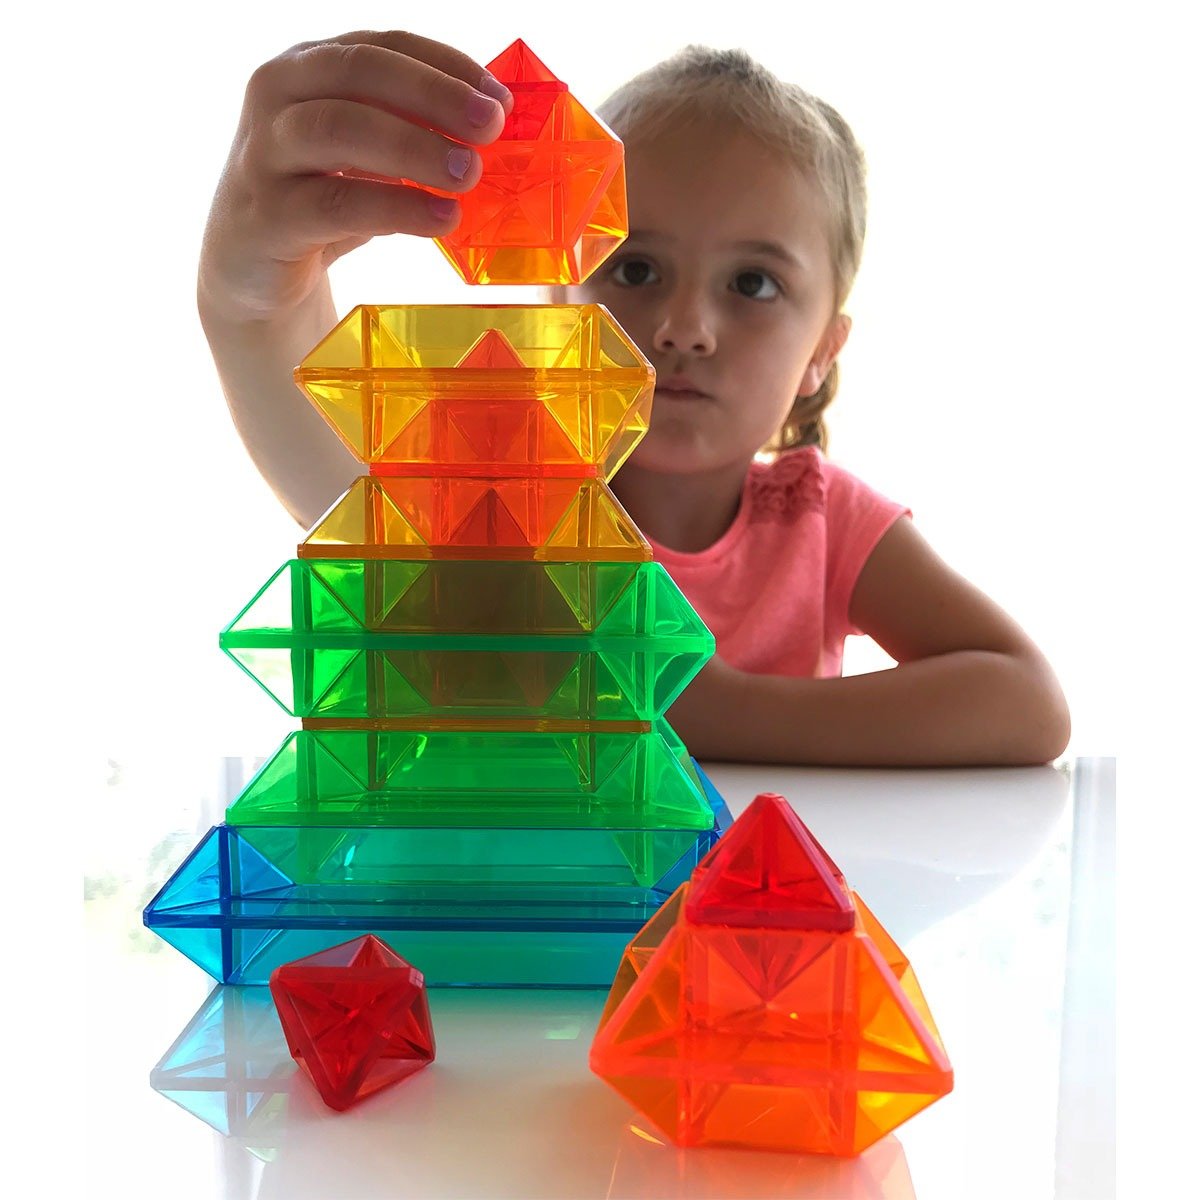 Sakkaro, Sakkaro is a geometry toy that will light up a child's creativity! It's translucent coloured pieces seem to magically blend together when you stack, nest and interlock them. Discover an endless variety of colourful shapes and patterns you can make on your own, or be inspired by our Idea Booklet which shows over 100 colourful patterns and shapes to make. Sakkaro is fun for the whole family. An amazing geometry resource which will light up a child's creativity! 15 translucent coloured pieces magicall